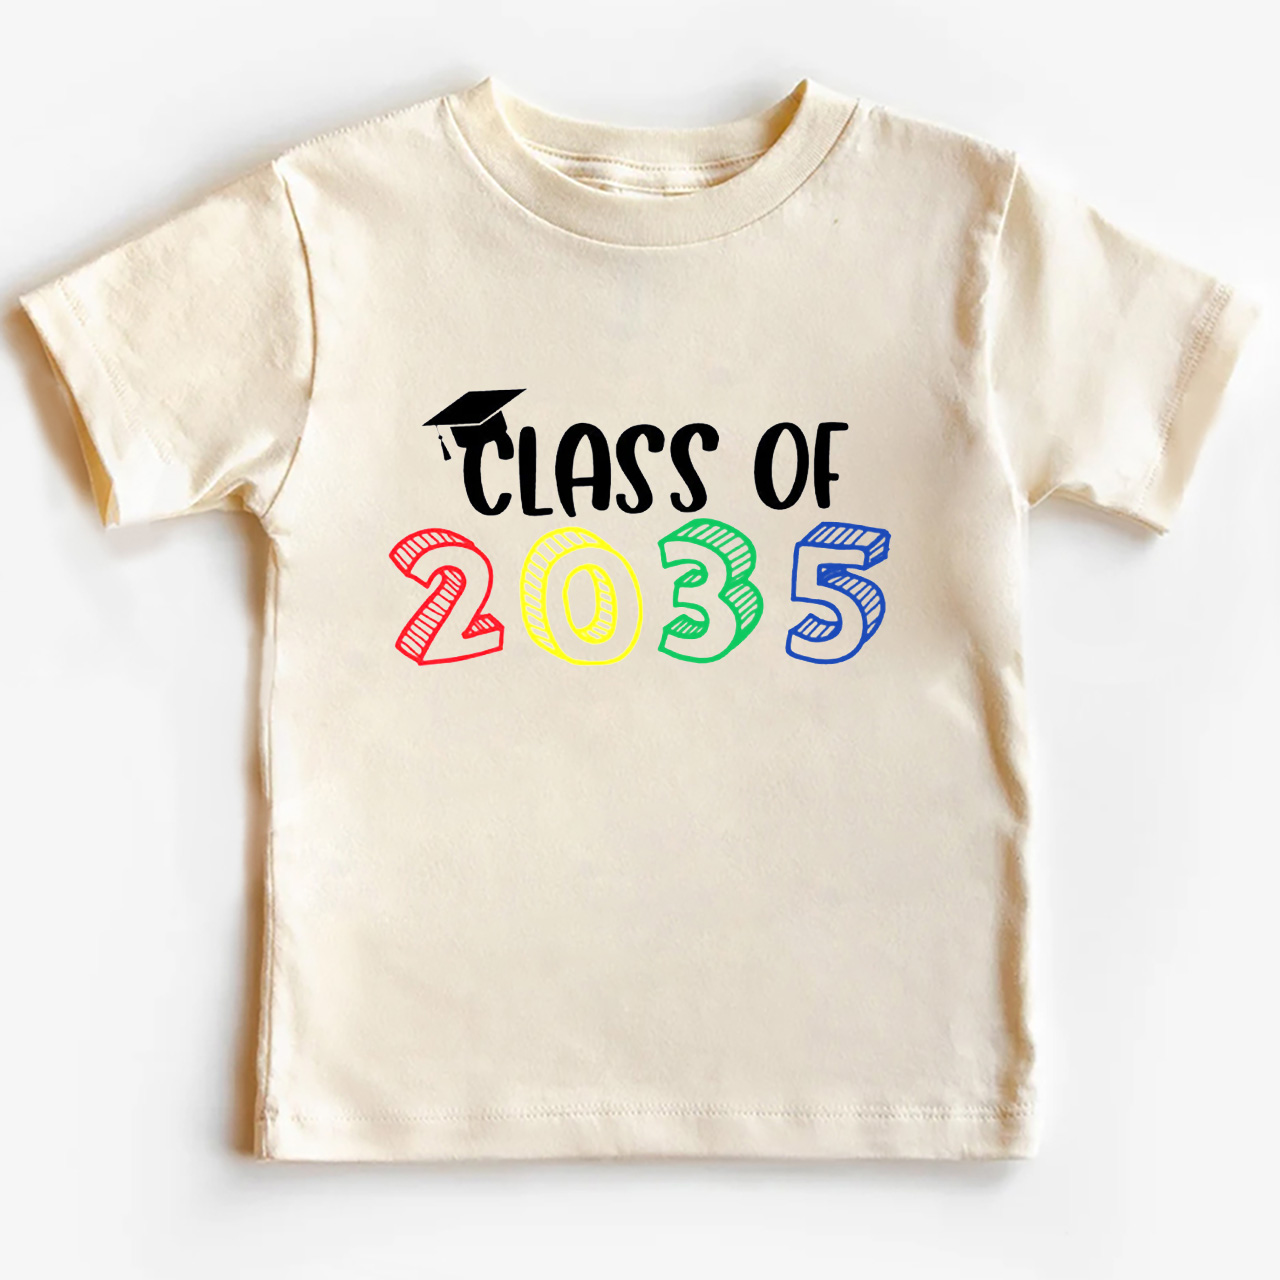 Hand Print-Class Of 2035 Personalized Shirts For School Kids